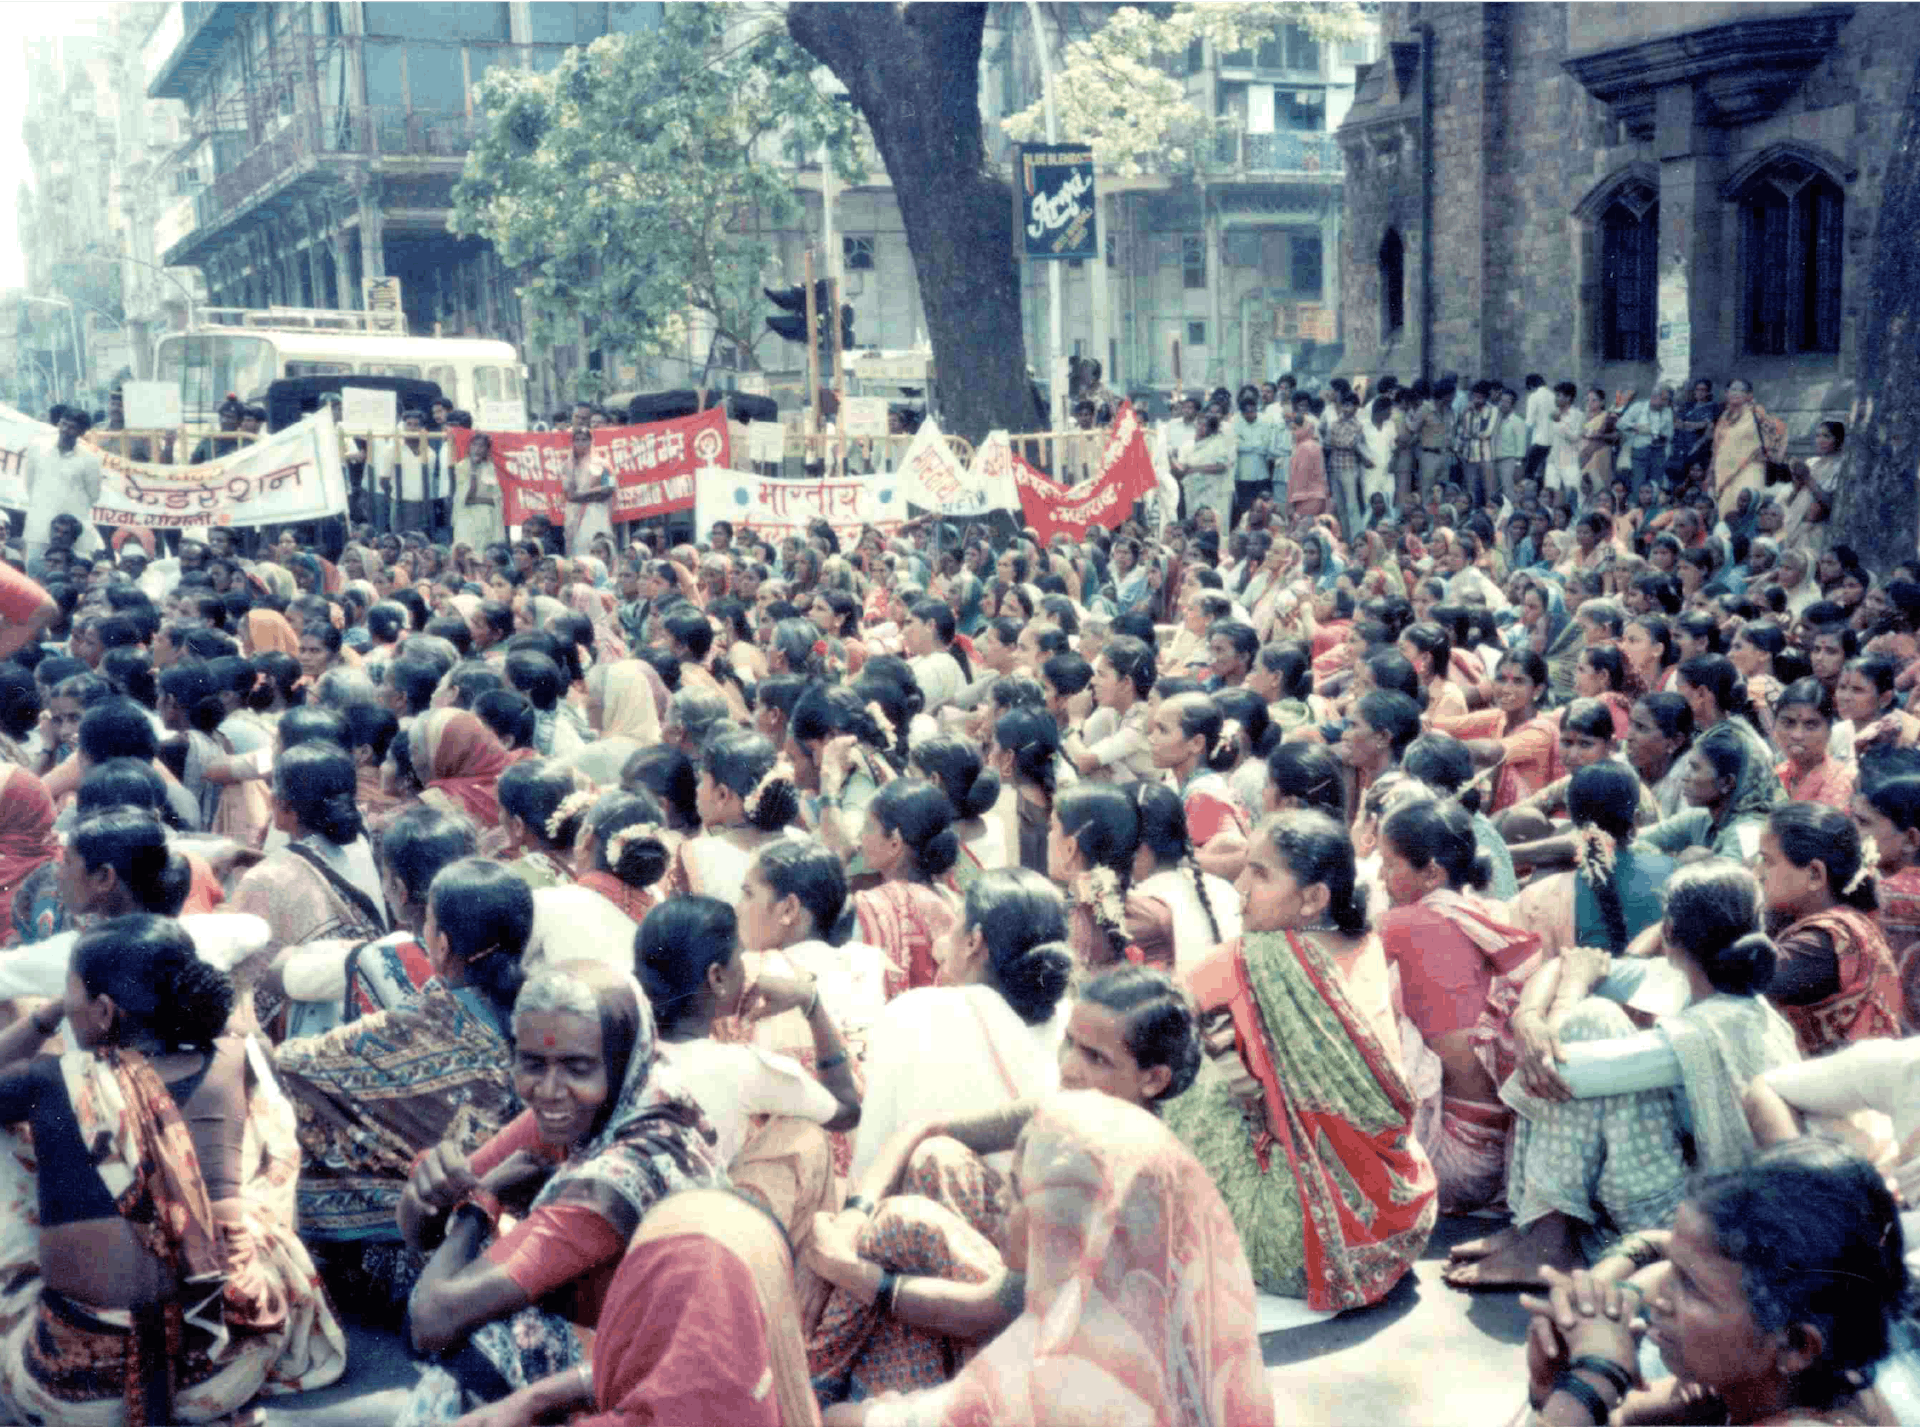 A public meeting to demand reopening of the Mathura case, in Mumbai’s Kala Ghoda area in March 1980. Credit: Vibhuti Patel